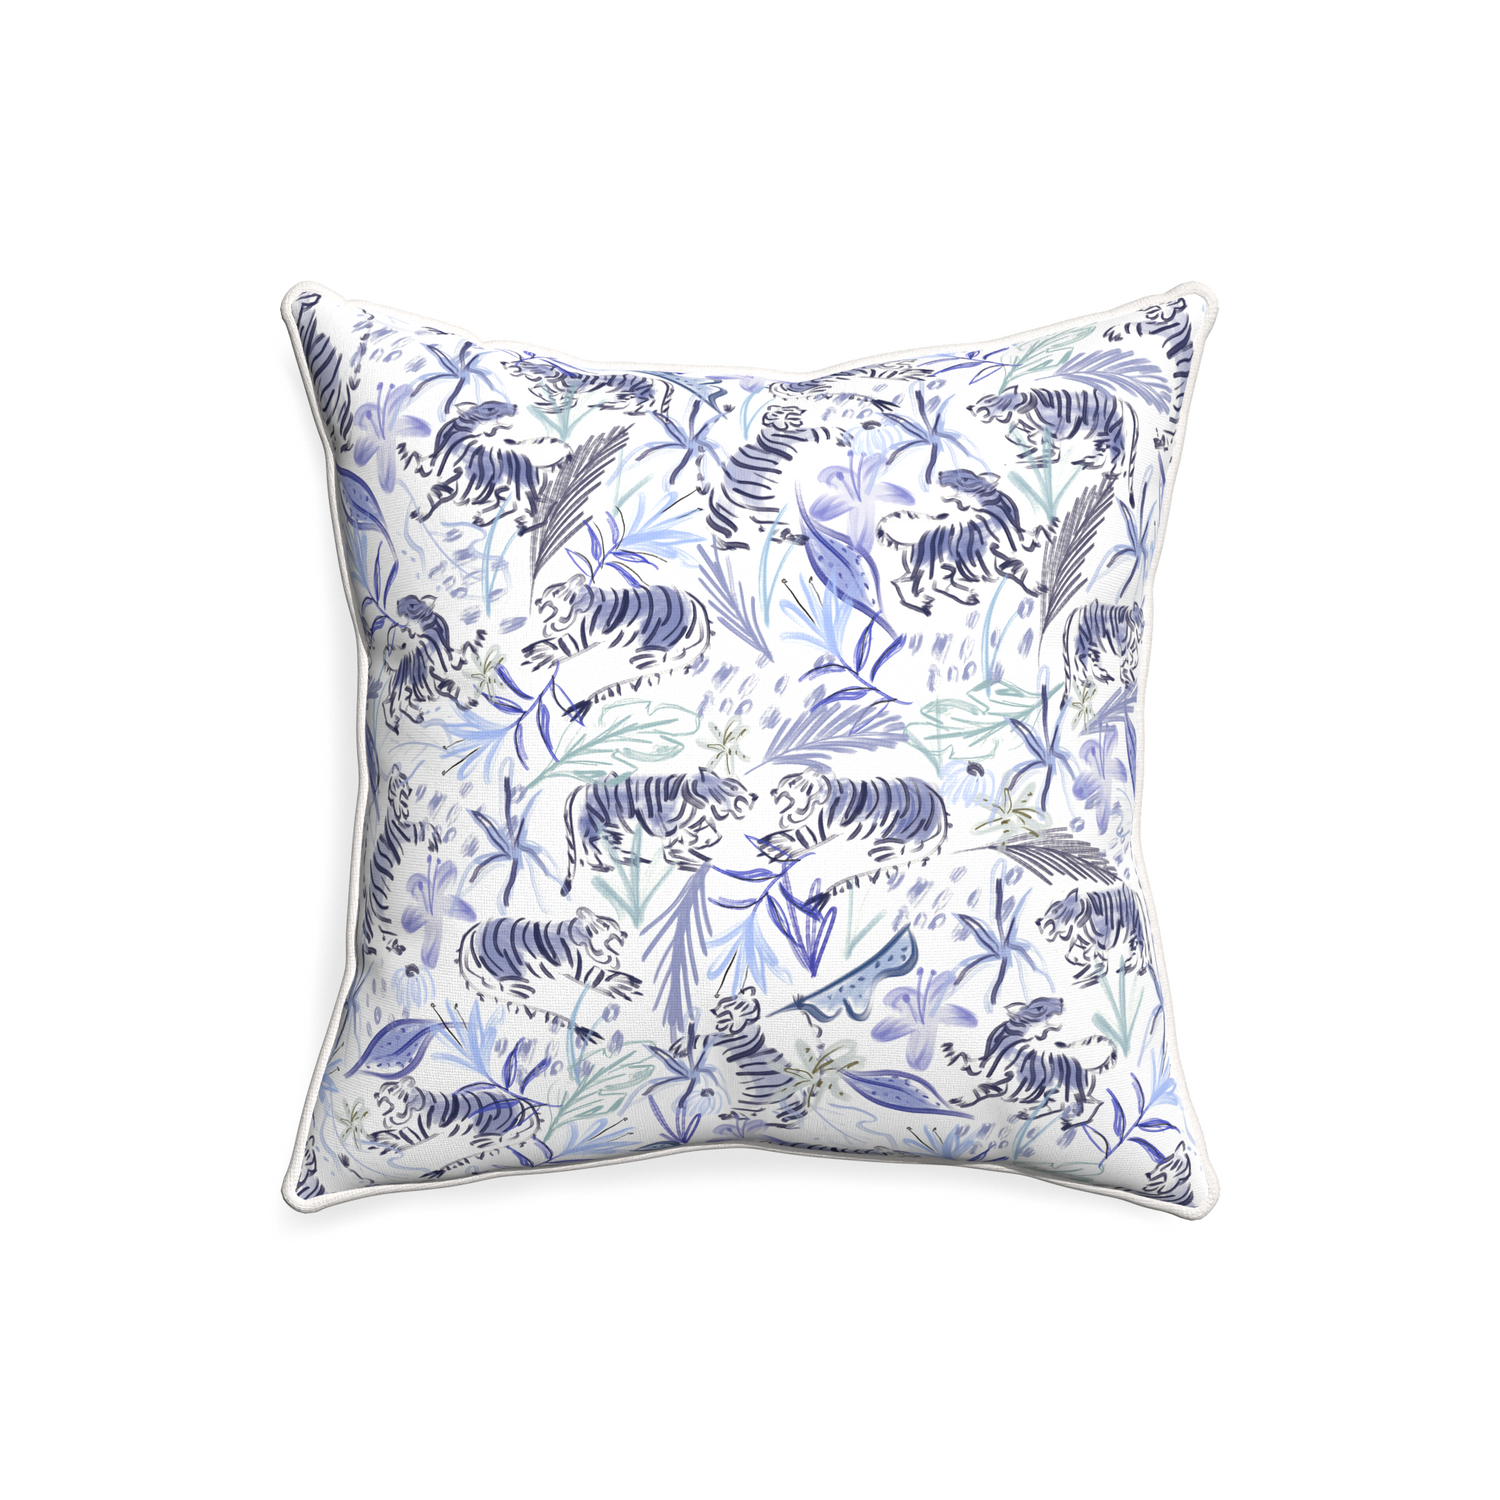 20-square frida blue custom blue with intricate tiger designpillow with snow piping on white background